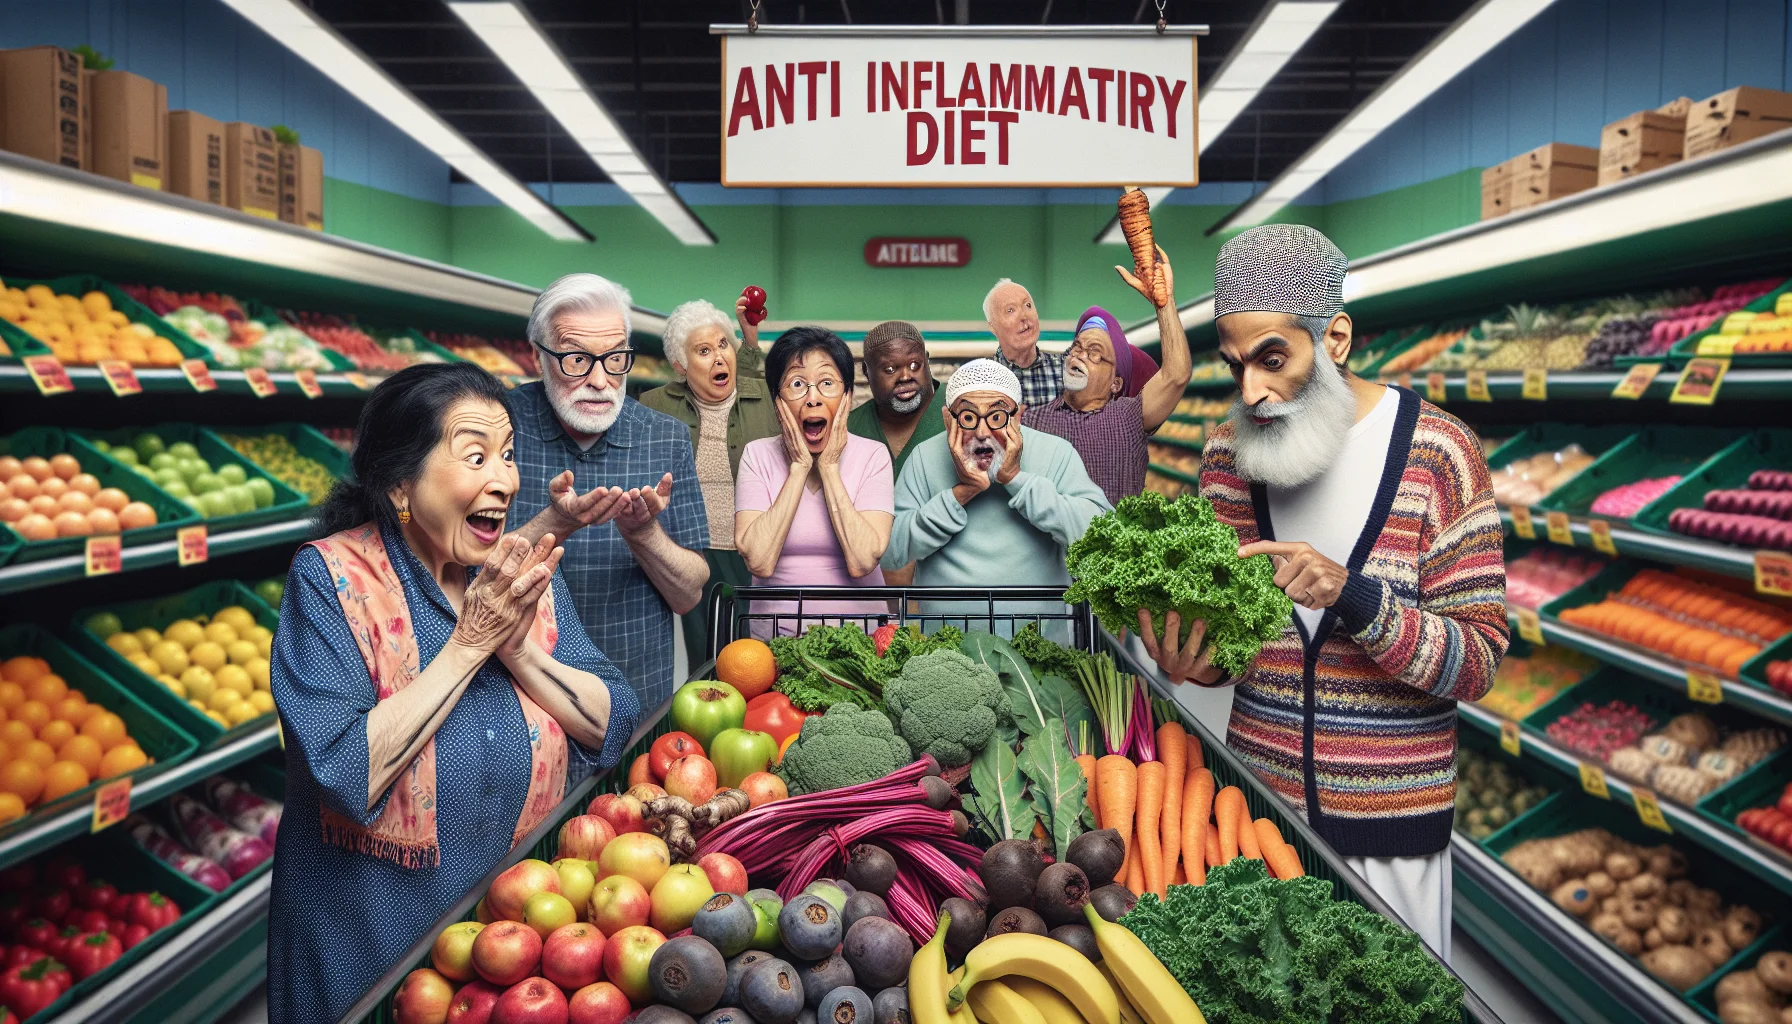 Create a humorous, realistic image of a scene in a grocery store. An elderly South Asian woman is enthusiastically examining a colorful pile of fresh fruits and vegetables. Beside her, an elderly Caucasian man is amusingly baffled by a bunch of kale. Above on the aisle signage, it says 'Anti Inflammatory Diet'. In the background, other elderly individuals of various descents are engaging in different comical reactions towards healthy food items, such as a Middle Eastern woman marveling at a beetroot and a west Asian man skeptically looking at a turmeric root. All are navigating their journey of an anti-inflammatory diet.